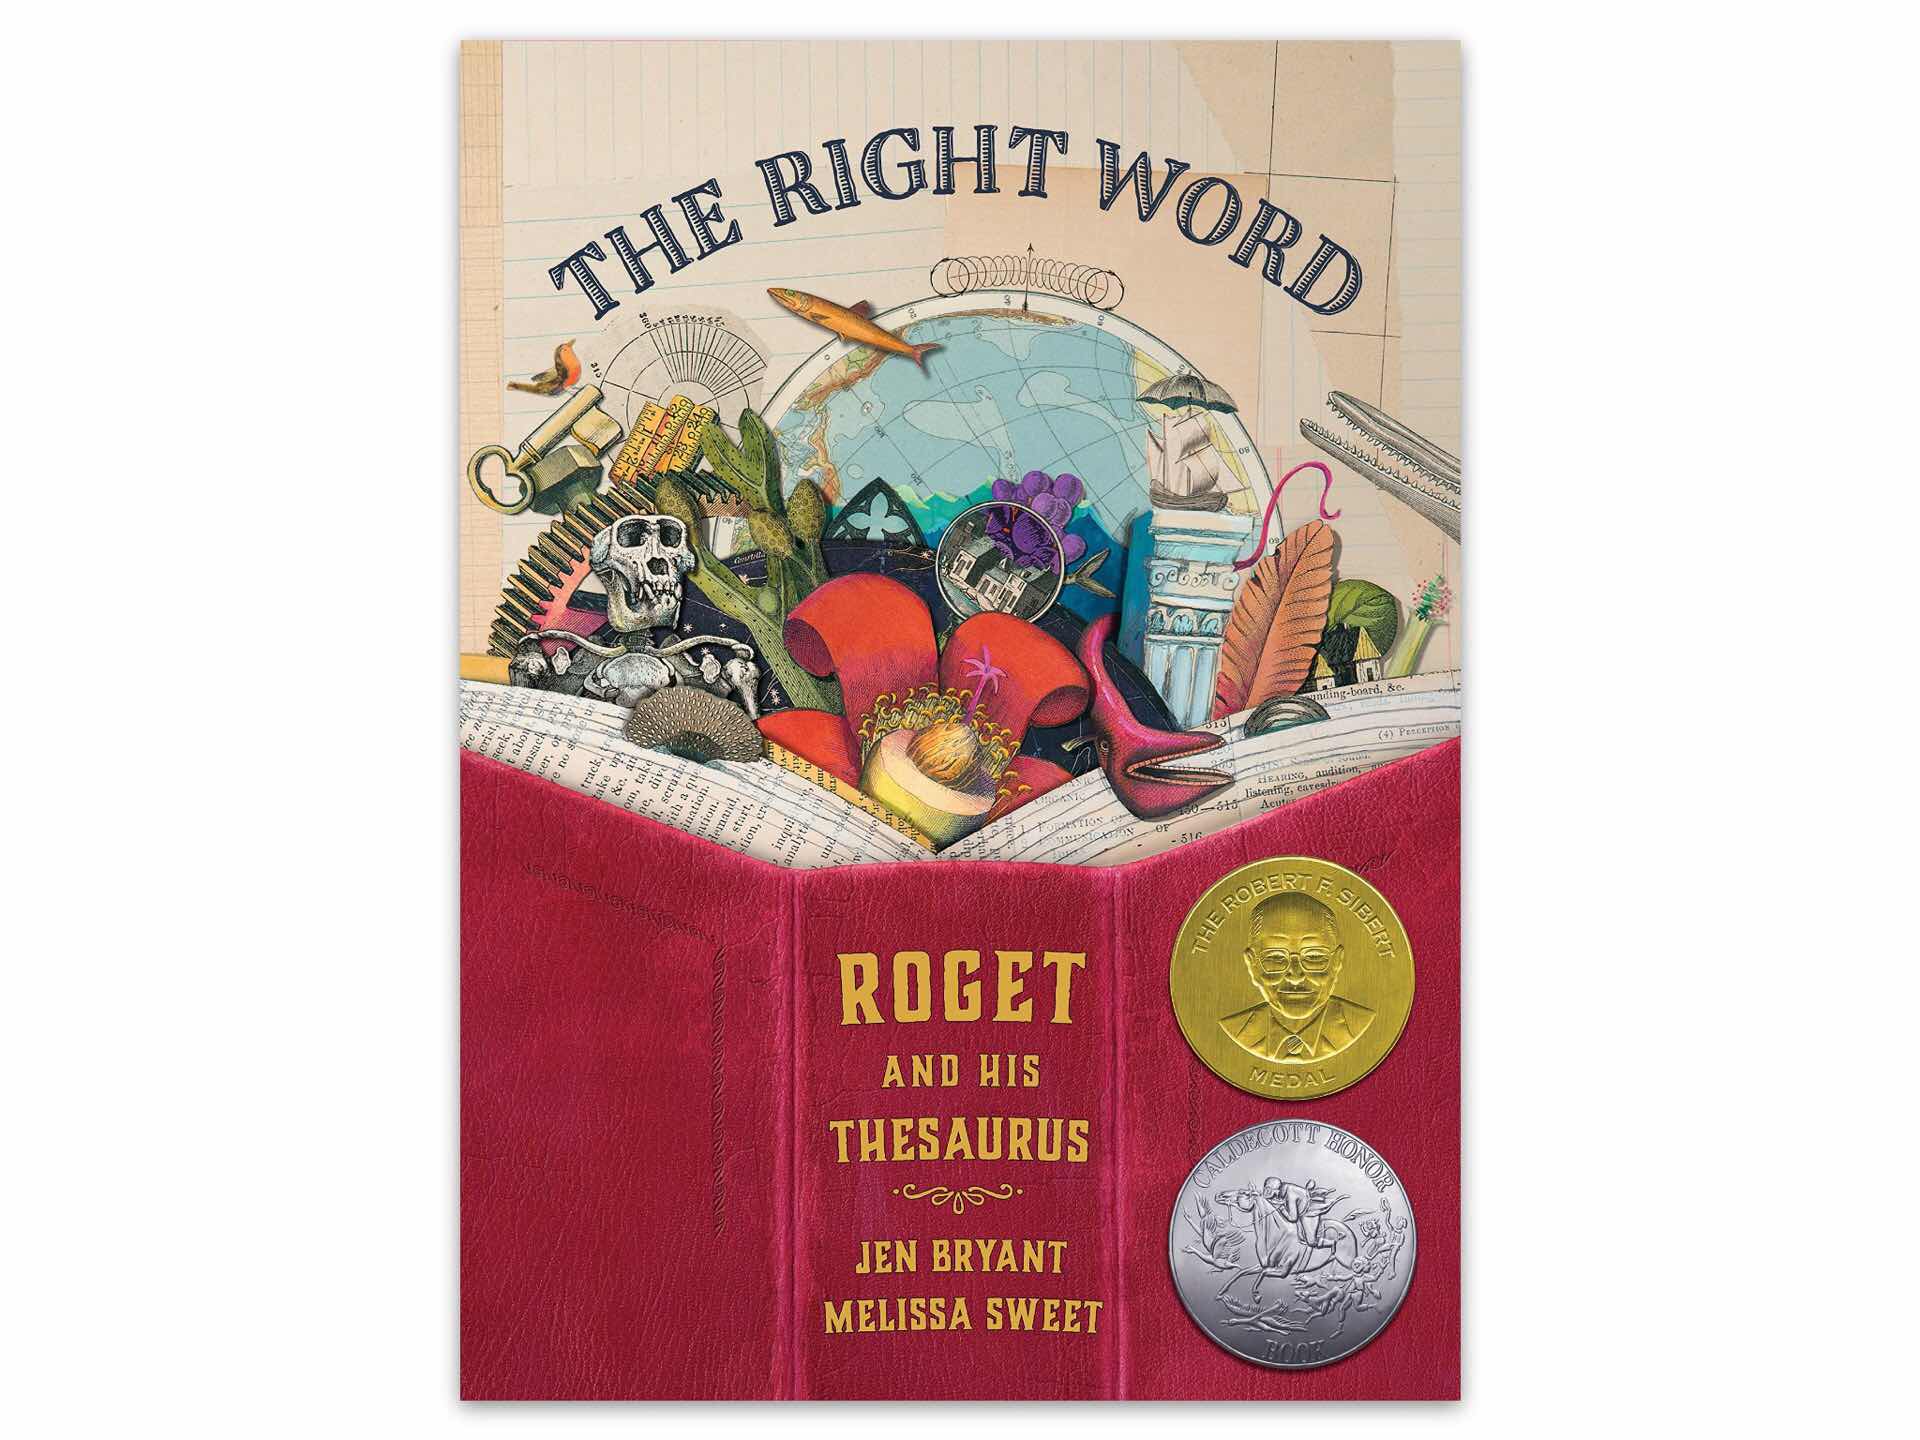 the-right-word-roget-and-his-thesaurus-by-jen-bryant-and-melissa-sweet